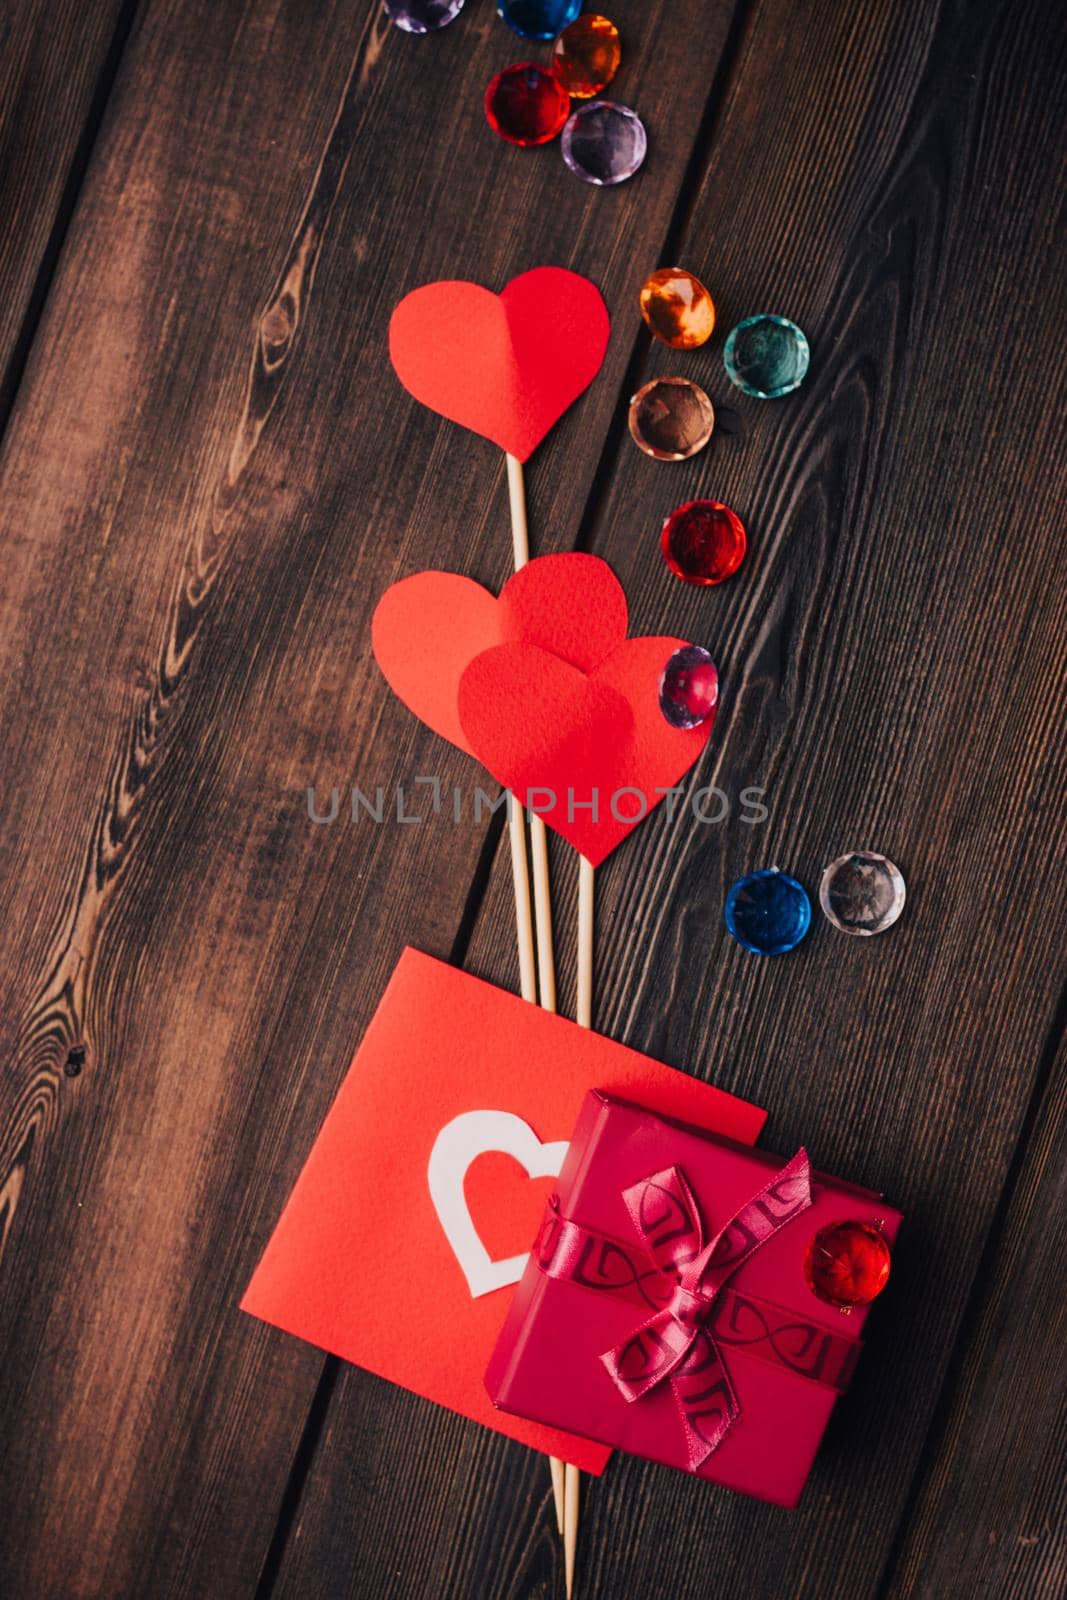 gifts decoration hearts holiday wooden background design. High quality photo